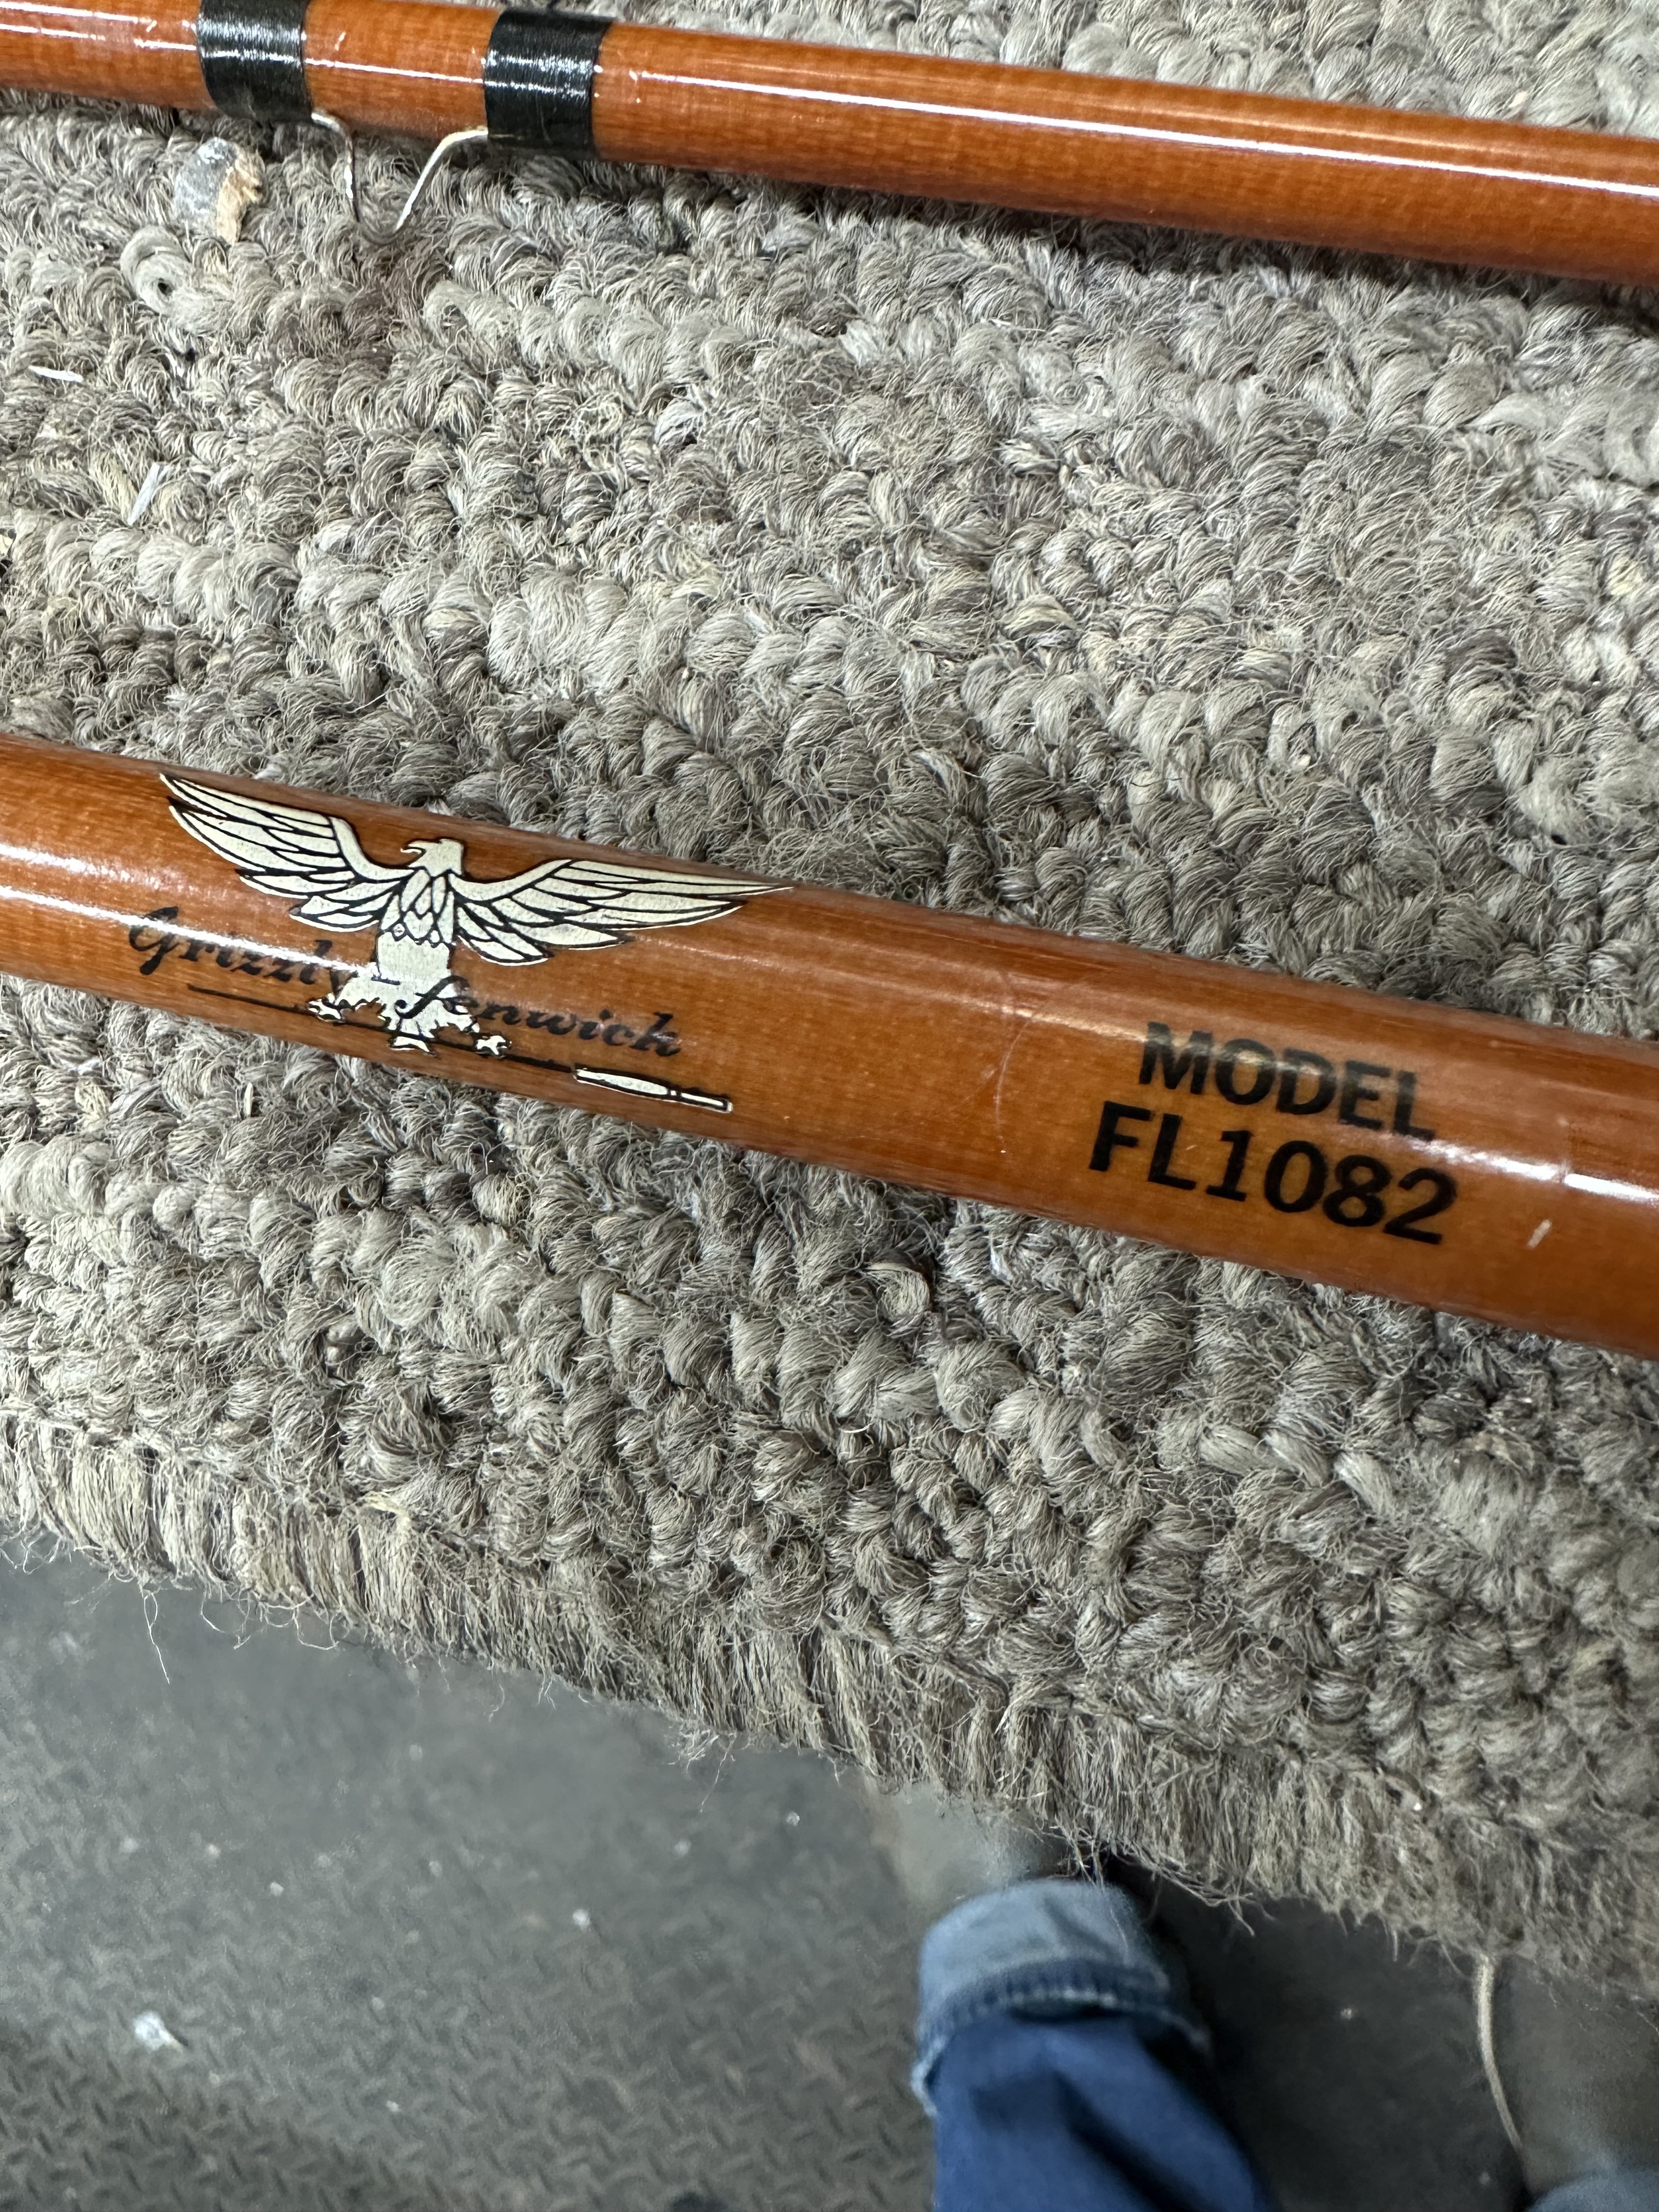 Some recent additions and a question., Collecting Fiberglass Fly Rods